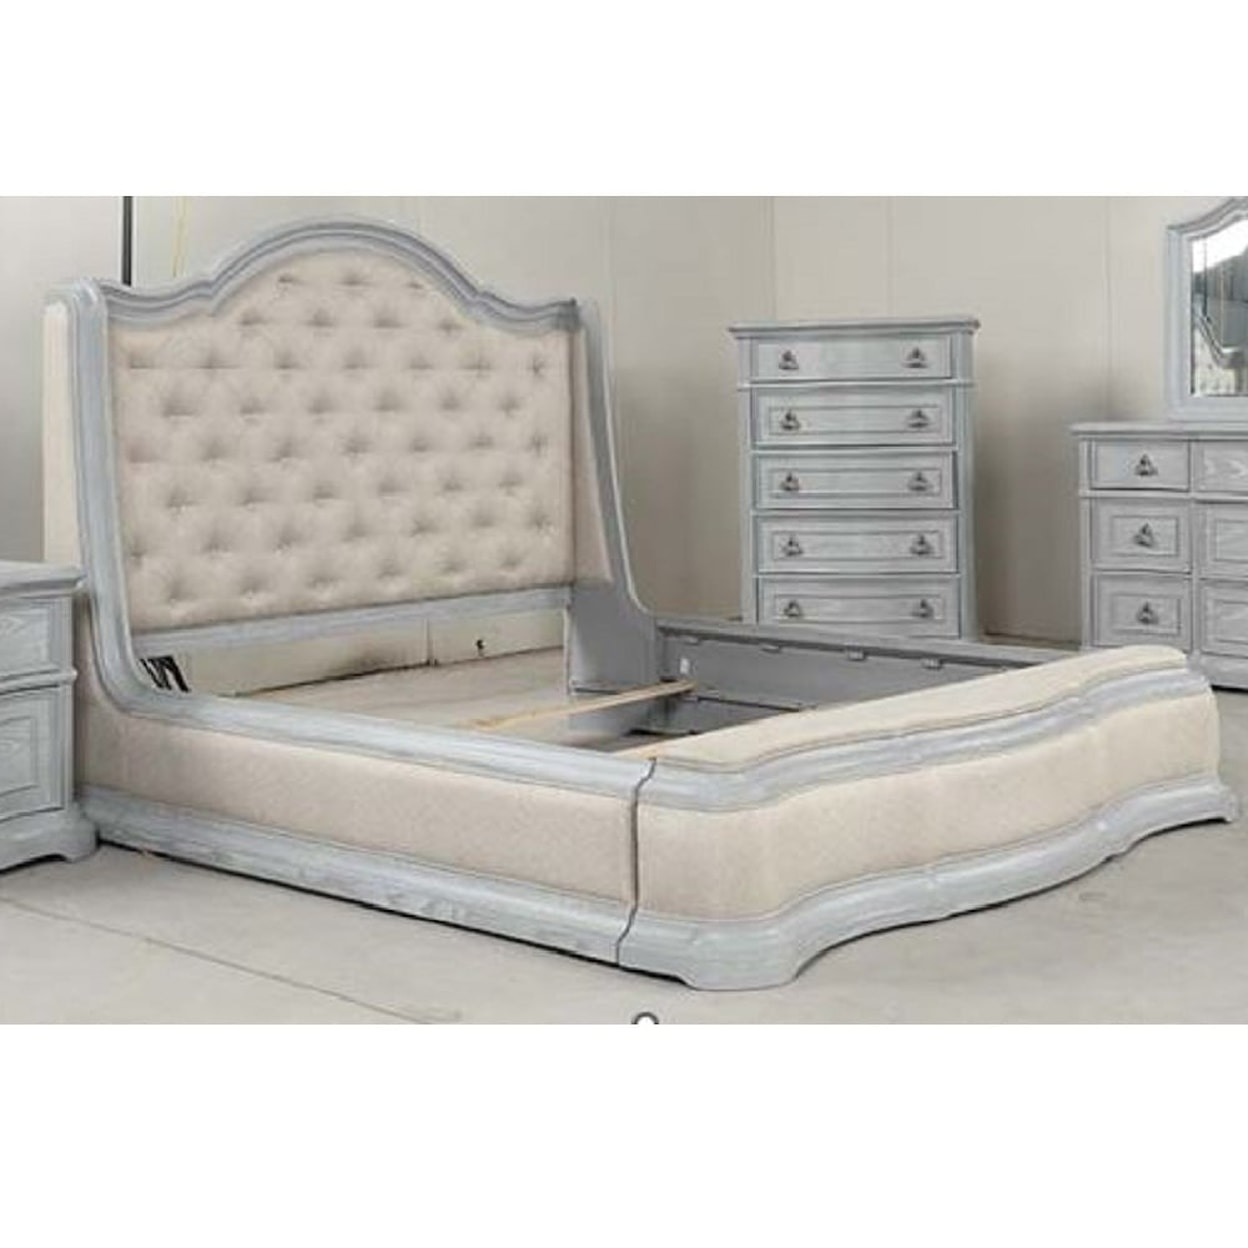 Acme Furniture Esdras Queen Bed